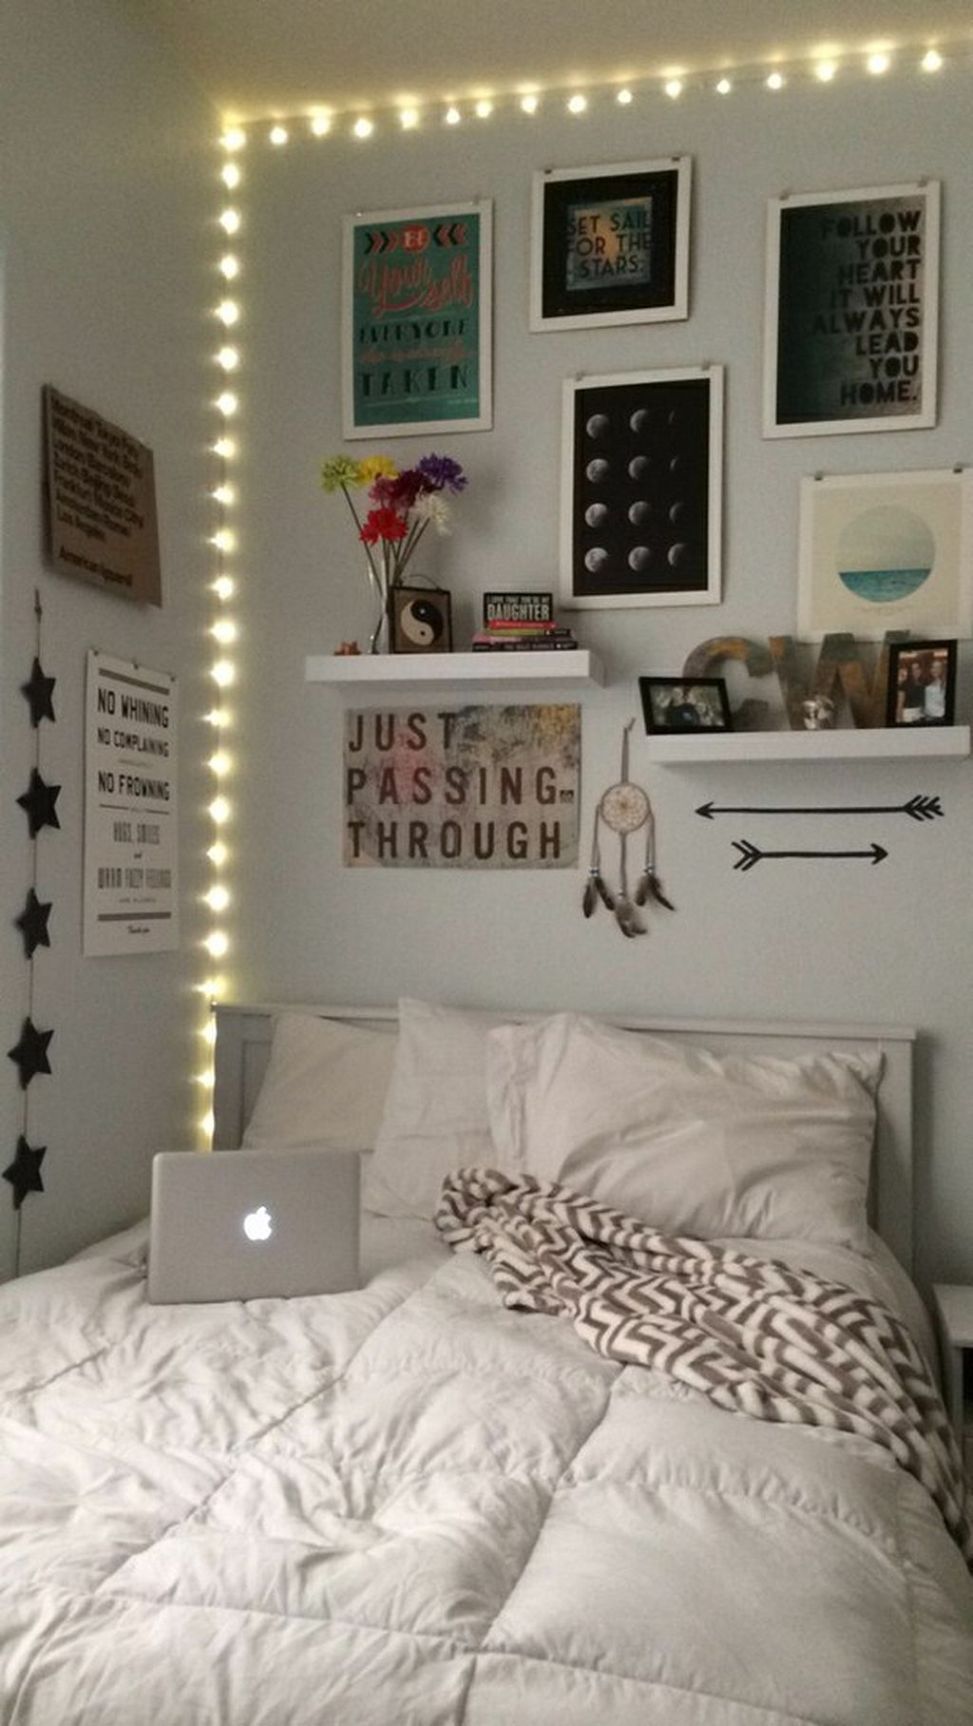 Cool DIY Hipster Bedroom Decorations Ideas -   11 room decor Hipster simple ideas